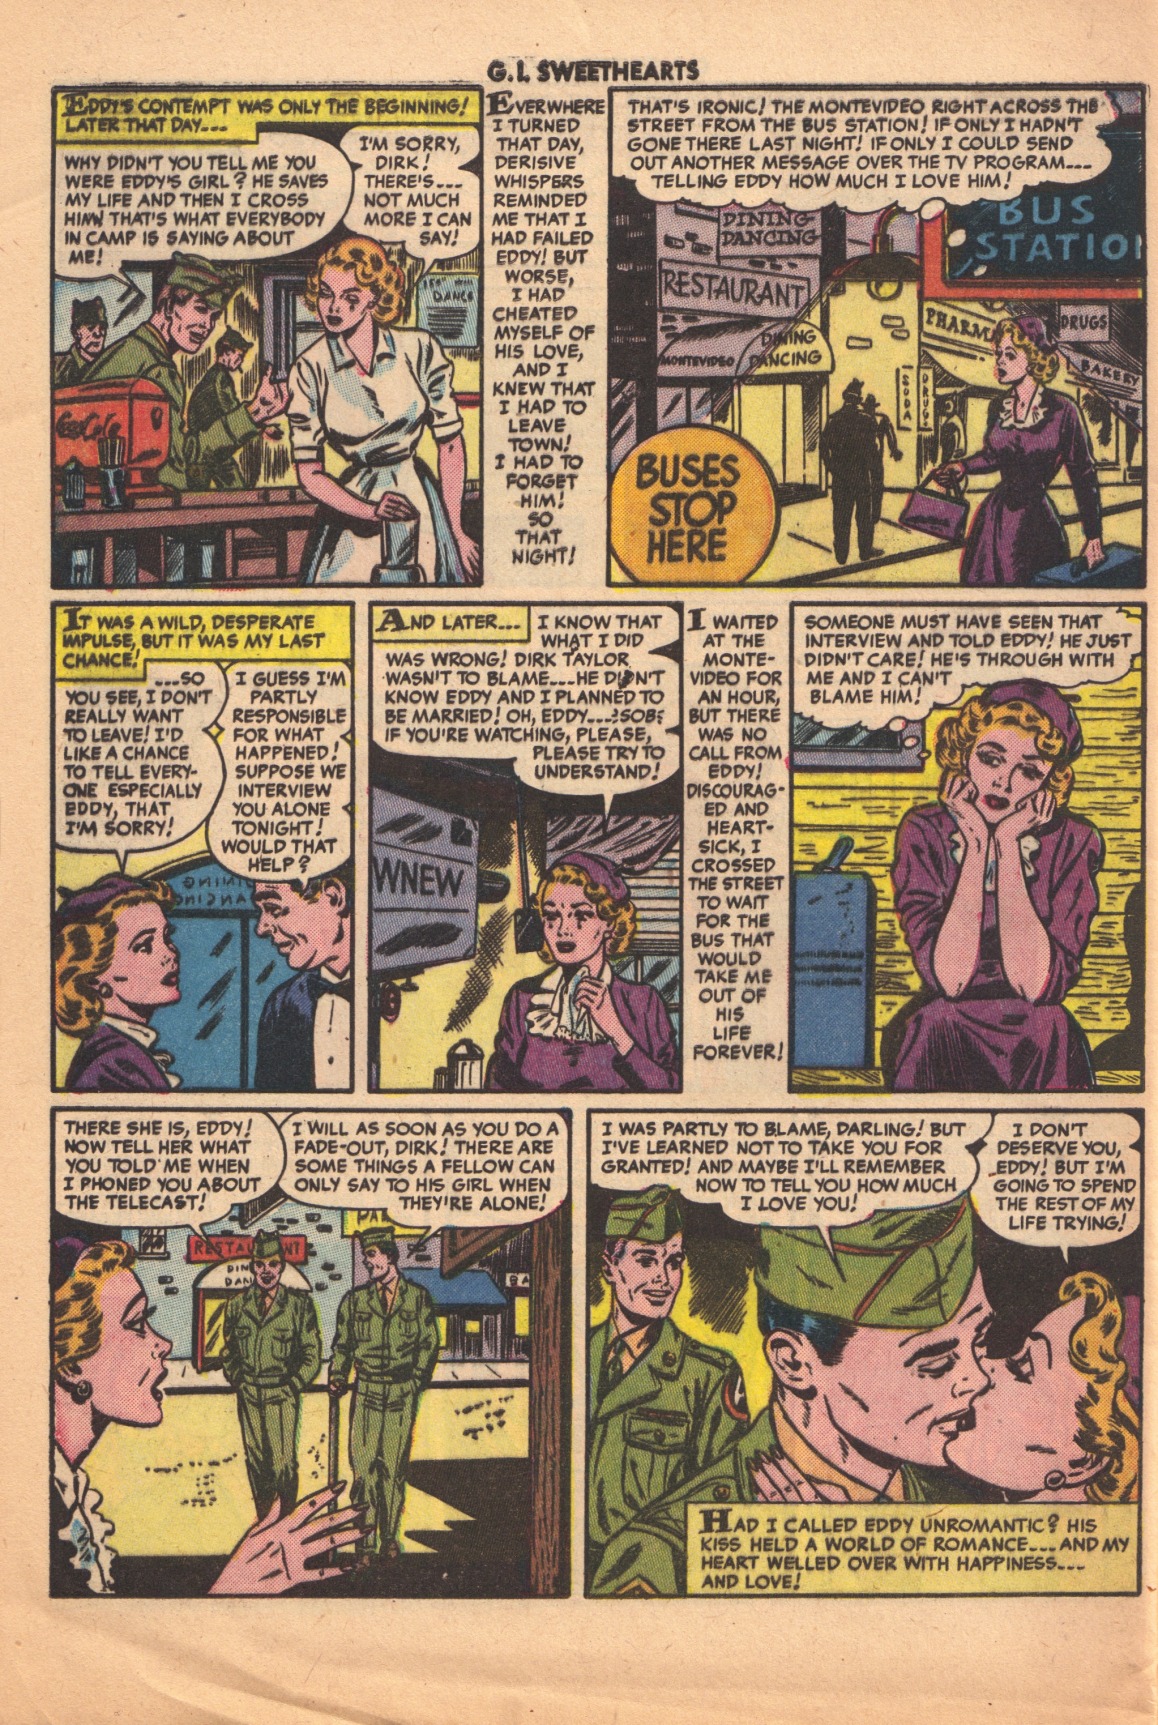 Read online G.I. Sweethearts comic -  Issue #40 - 32